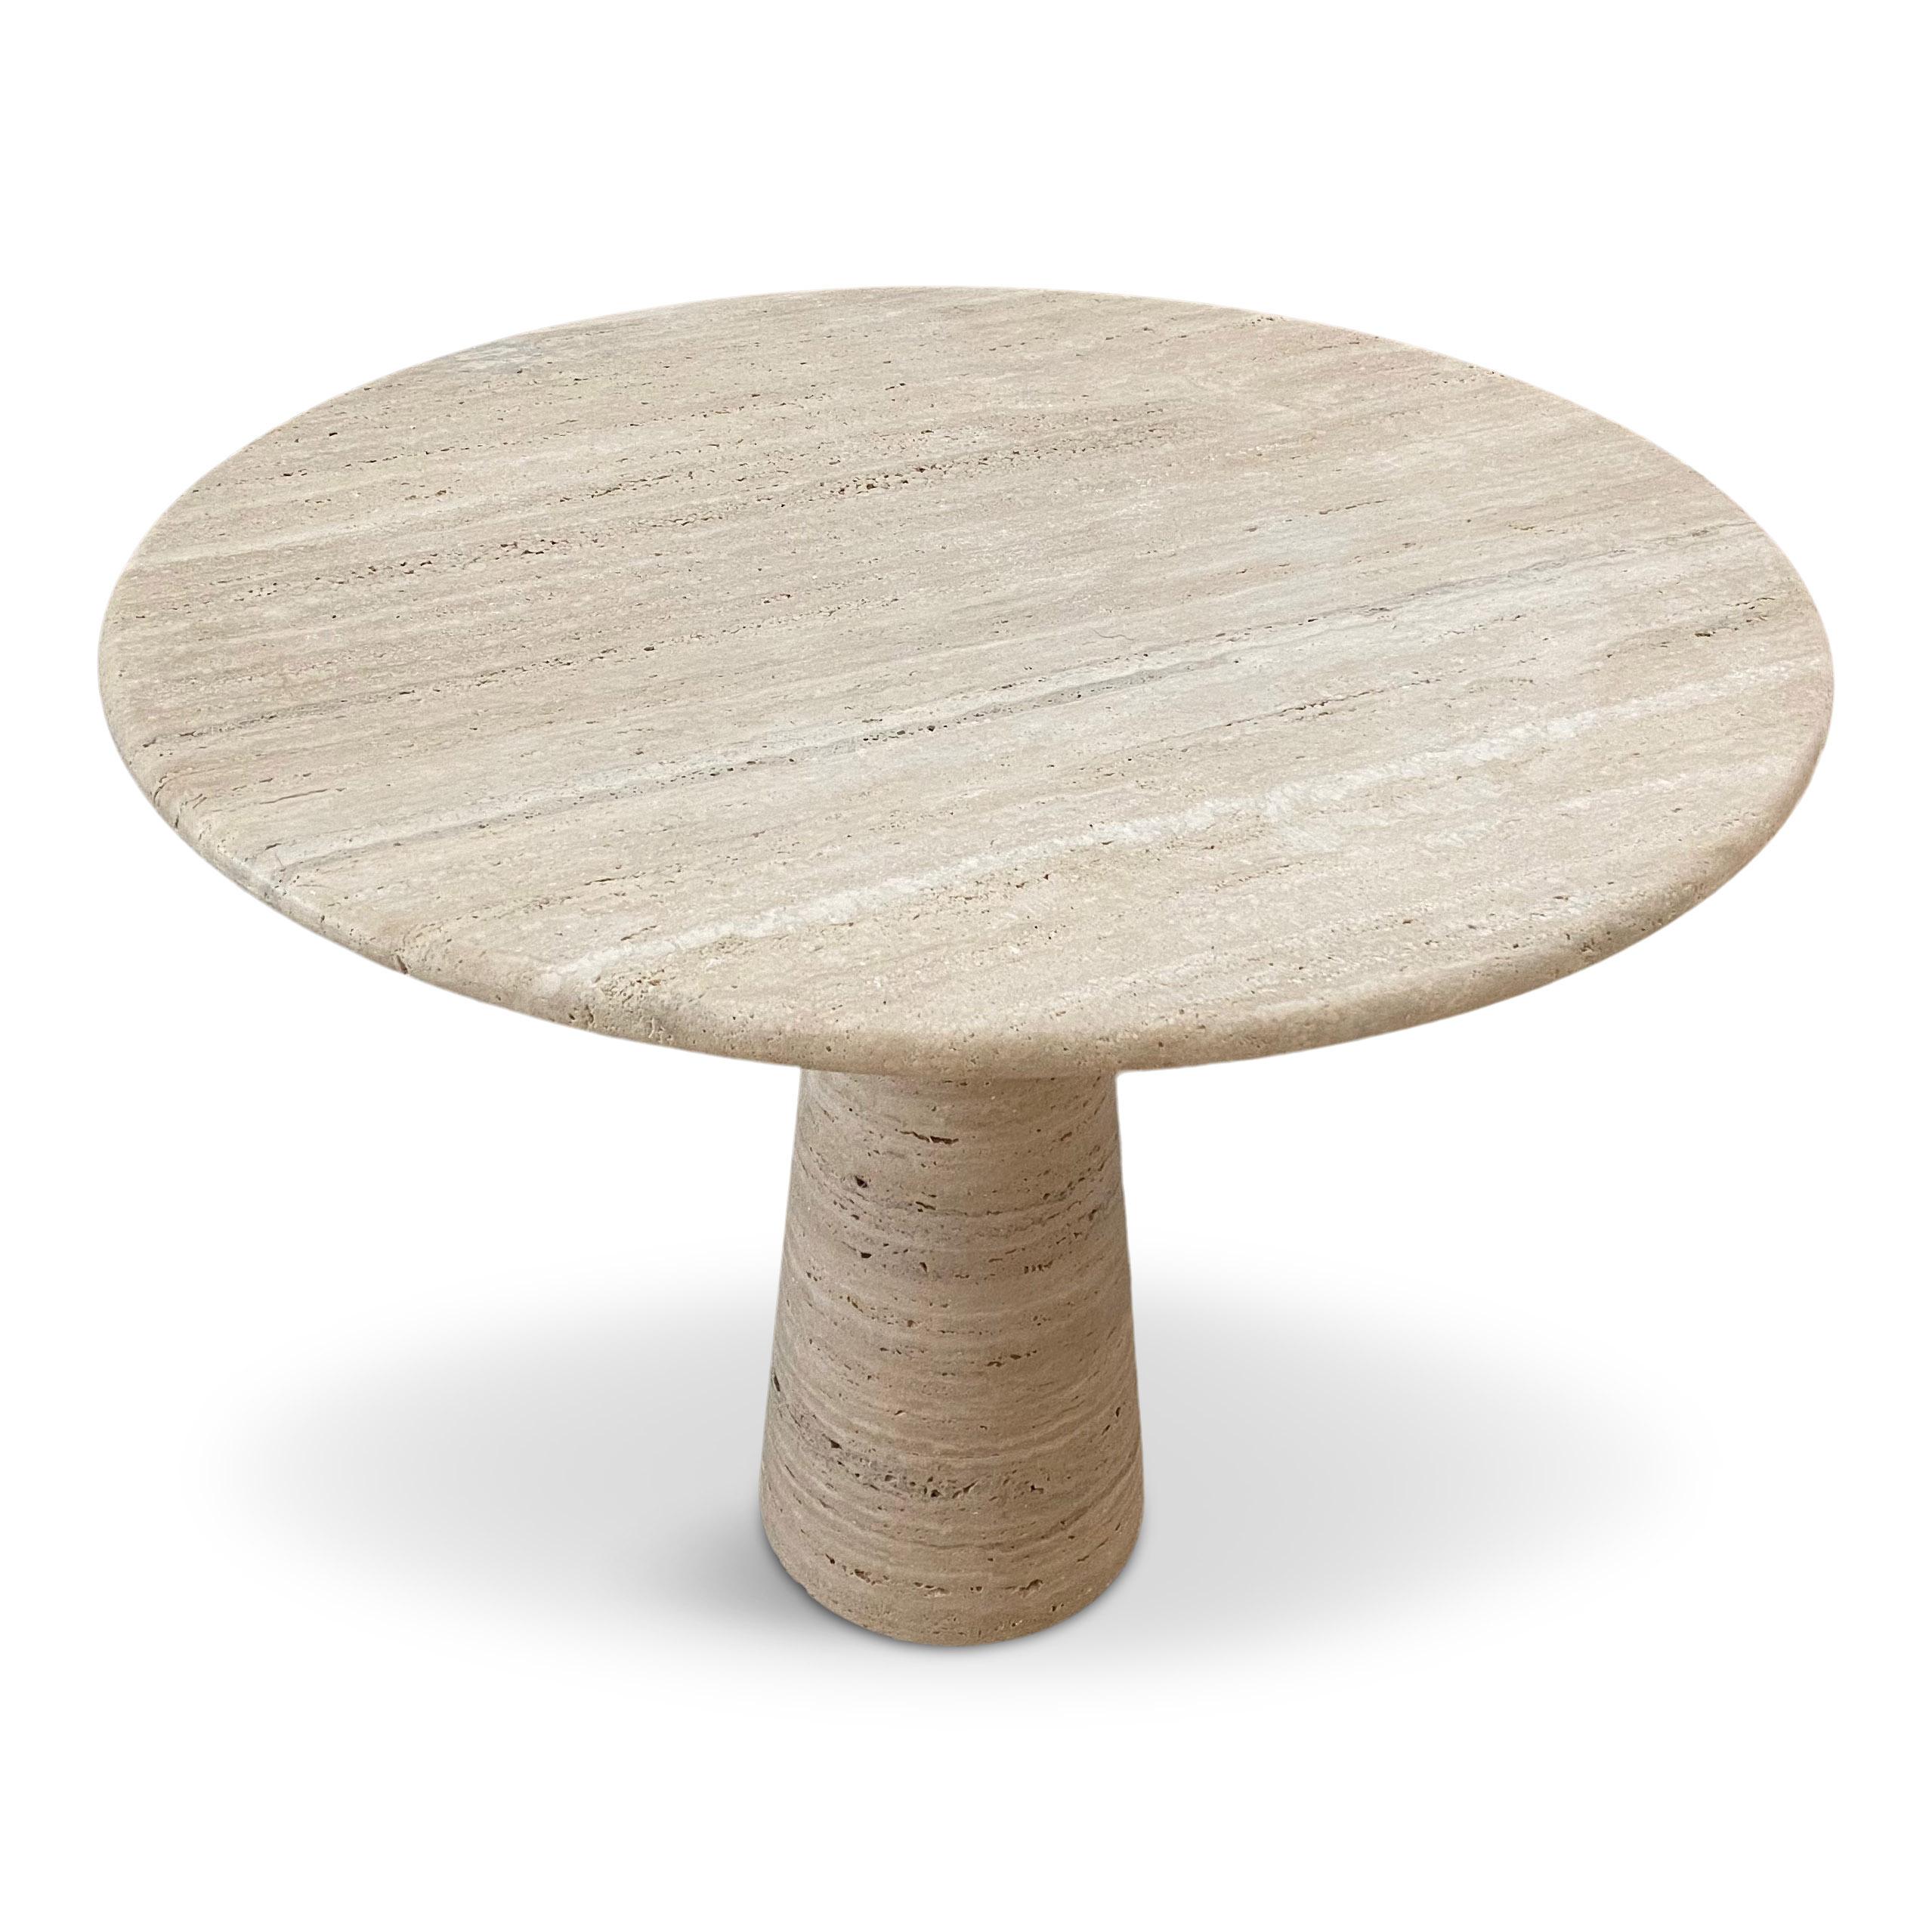 Bespoke Round Italian Travertine Dining Table For Sale 2